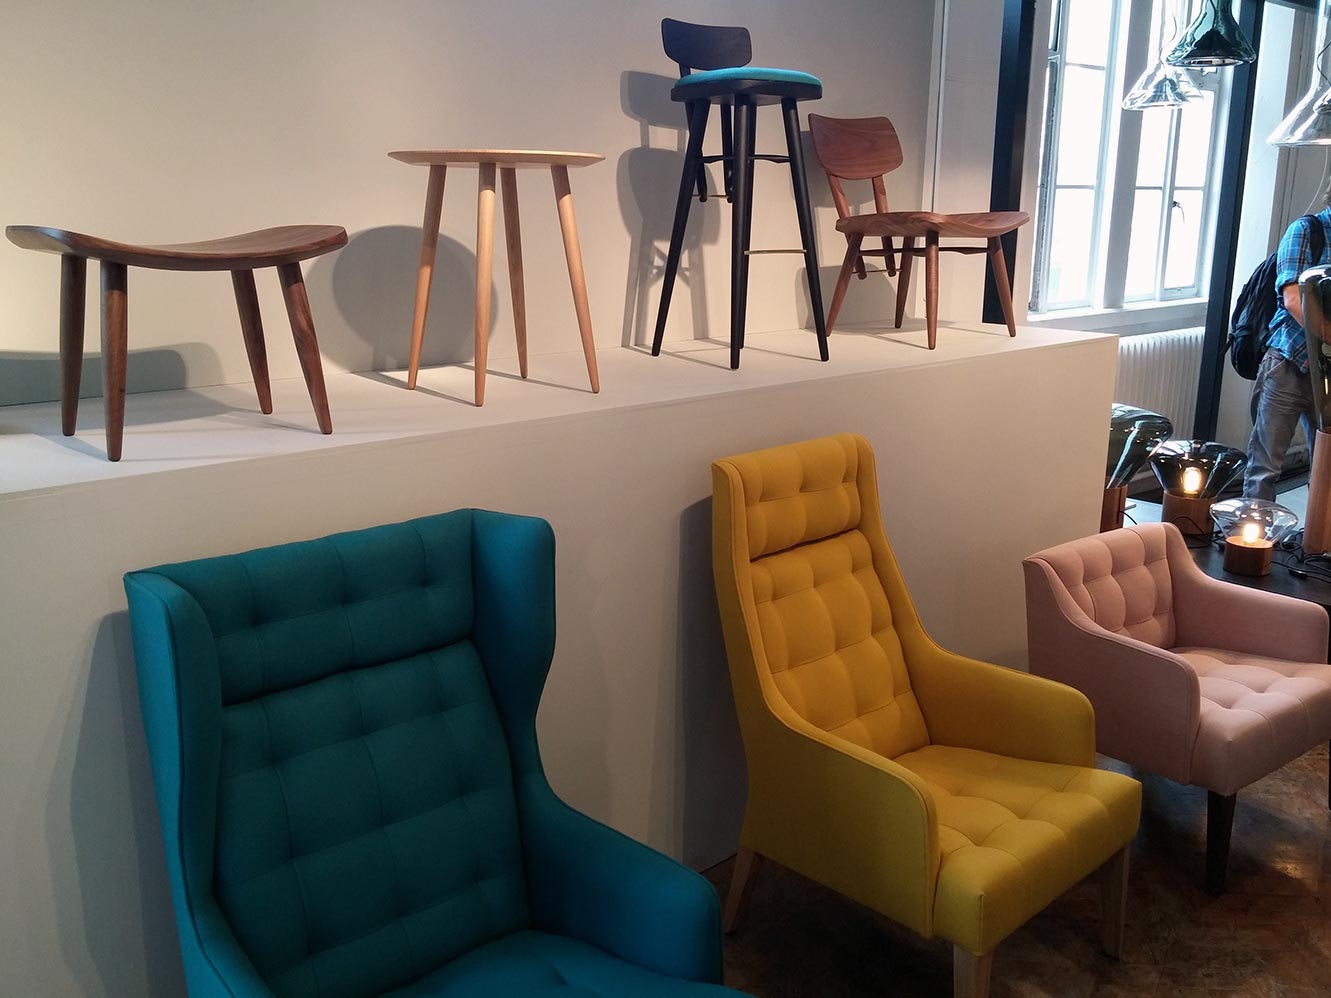   James Design  stood out for us, overall superb range of contemporary products. We especially liked the back feature on the chairs and stools. 